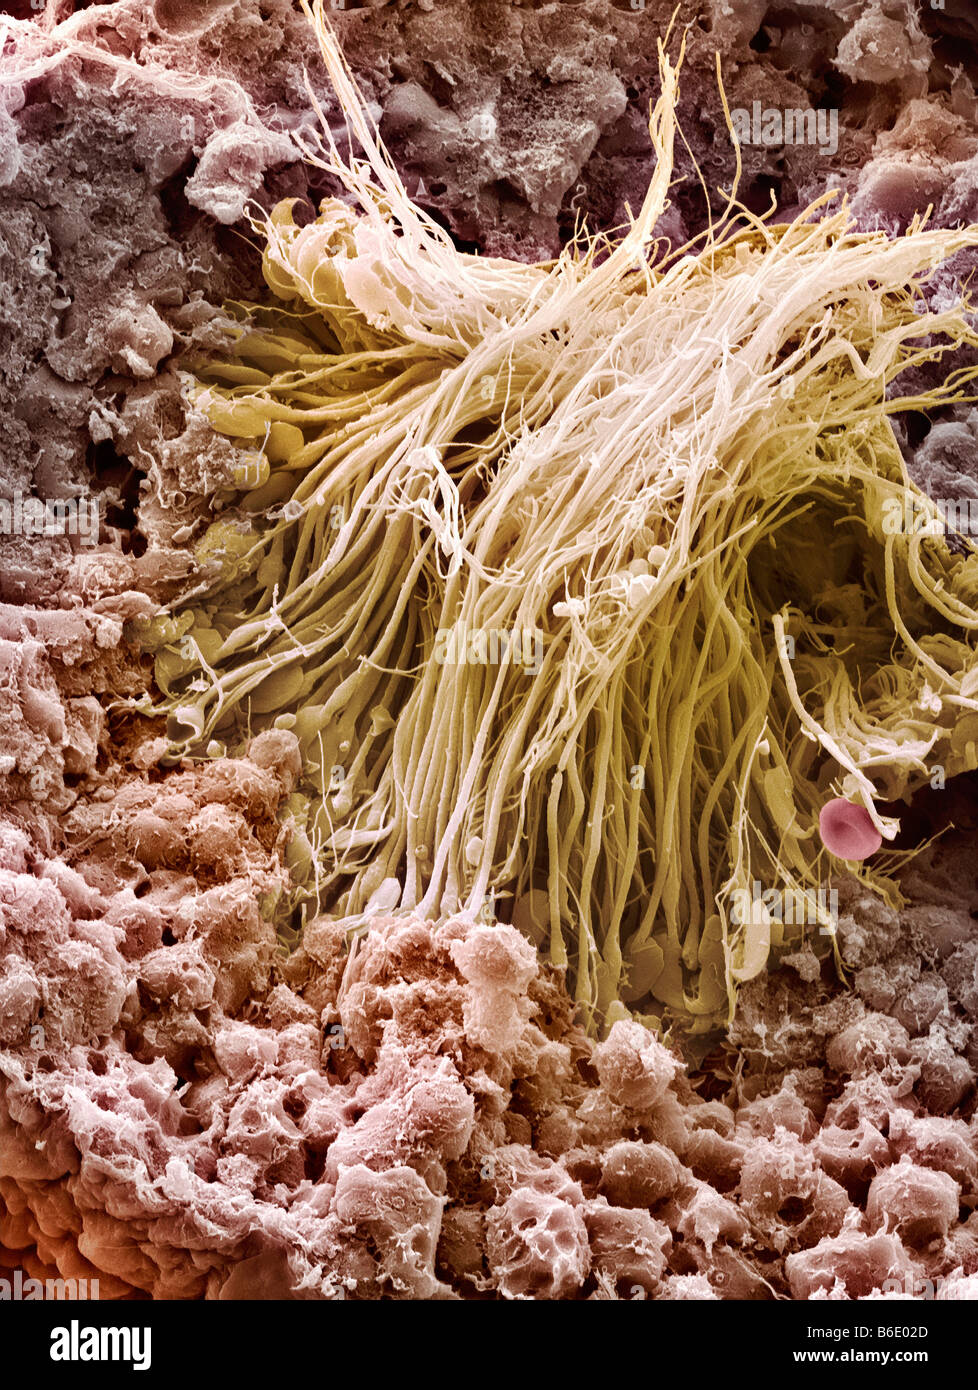 Sperm production site, Coloured scanning electron micrograph (SEM) showing sperm cells in a seminiferous tubule of the testis. Stock Photo